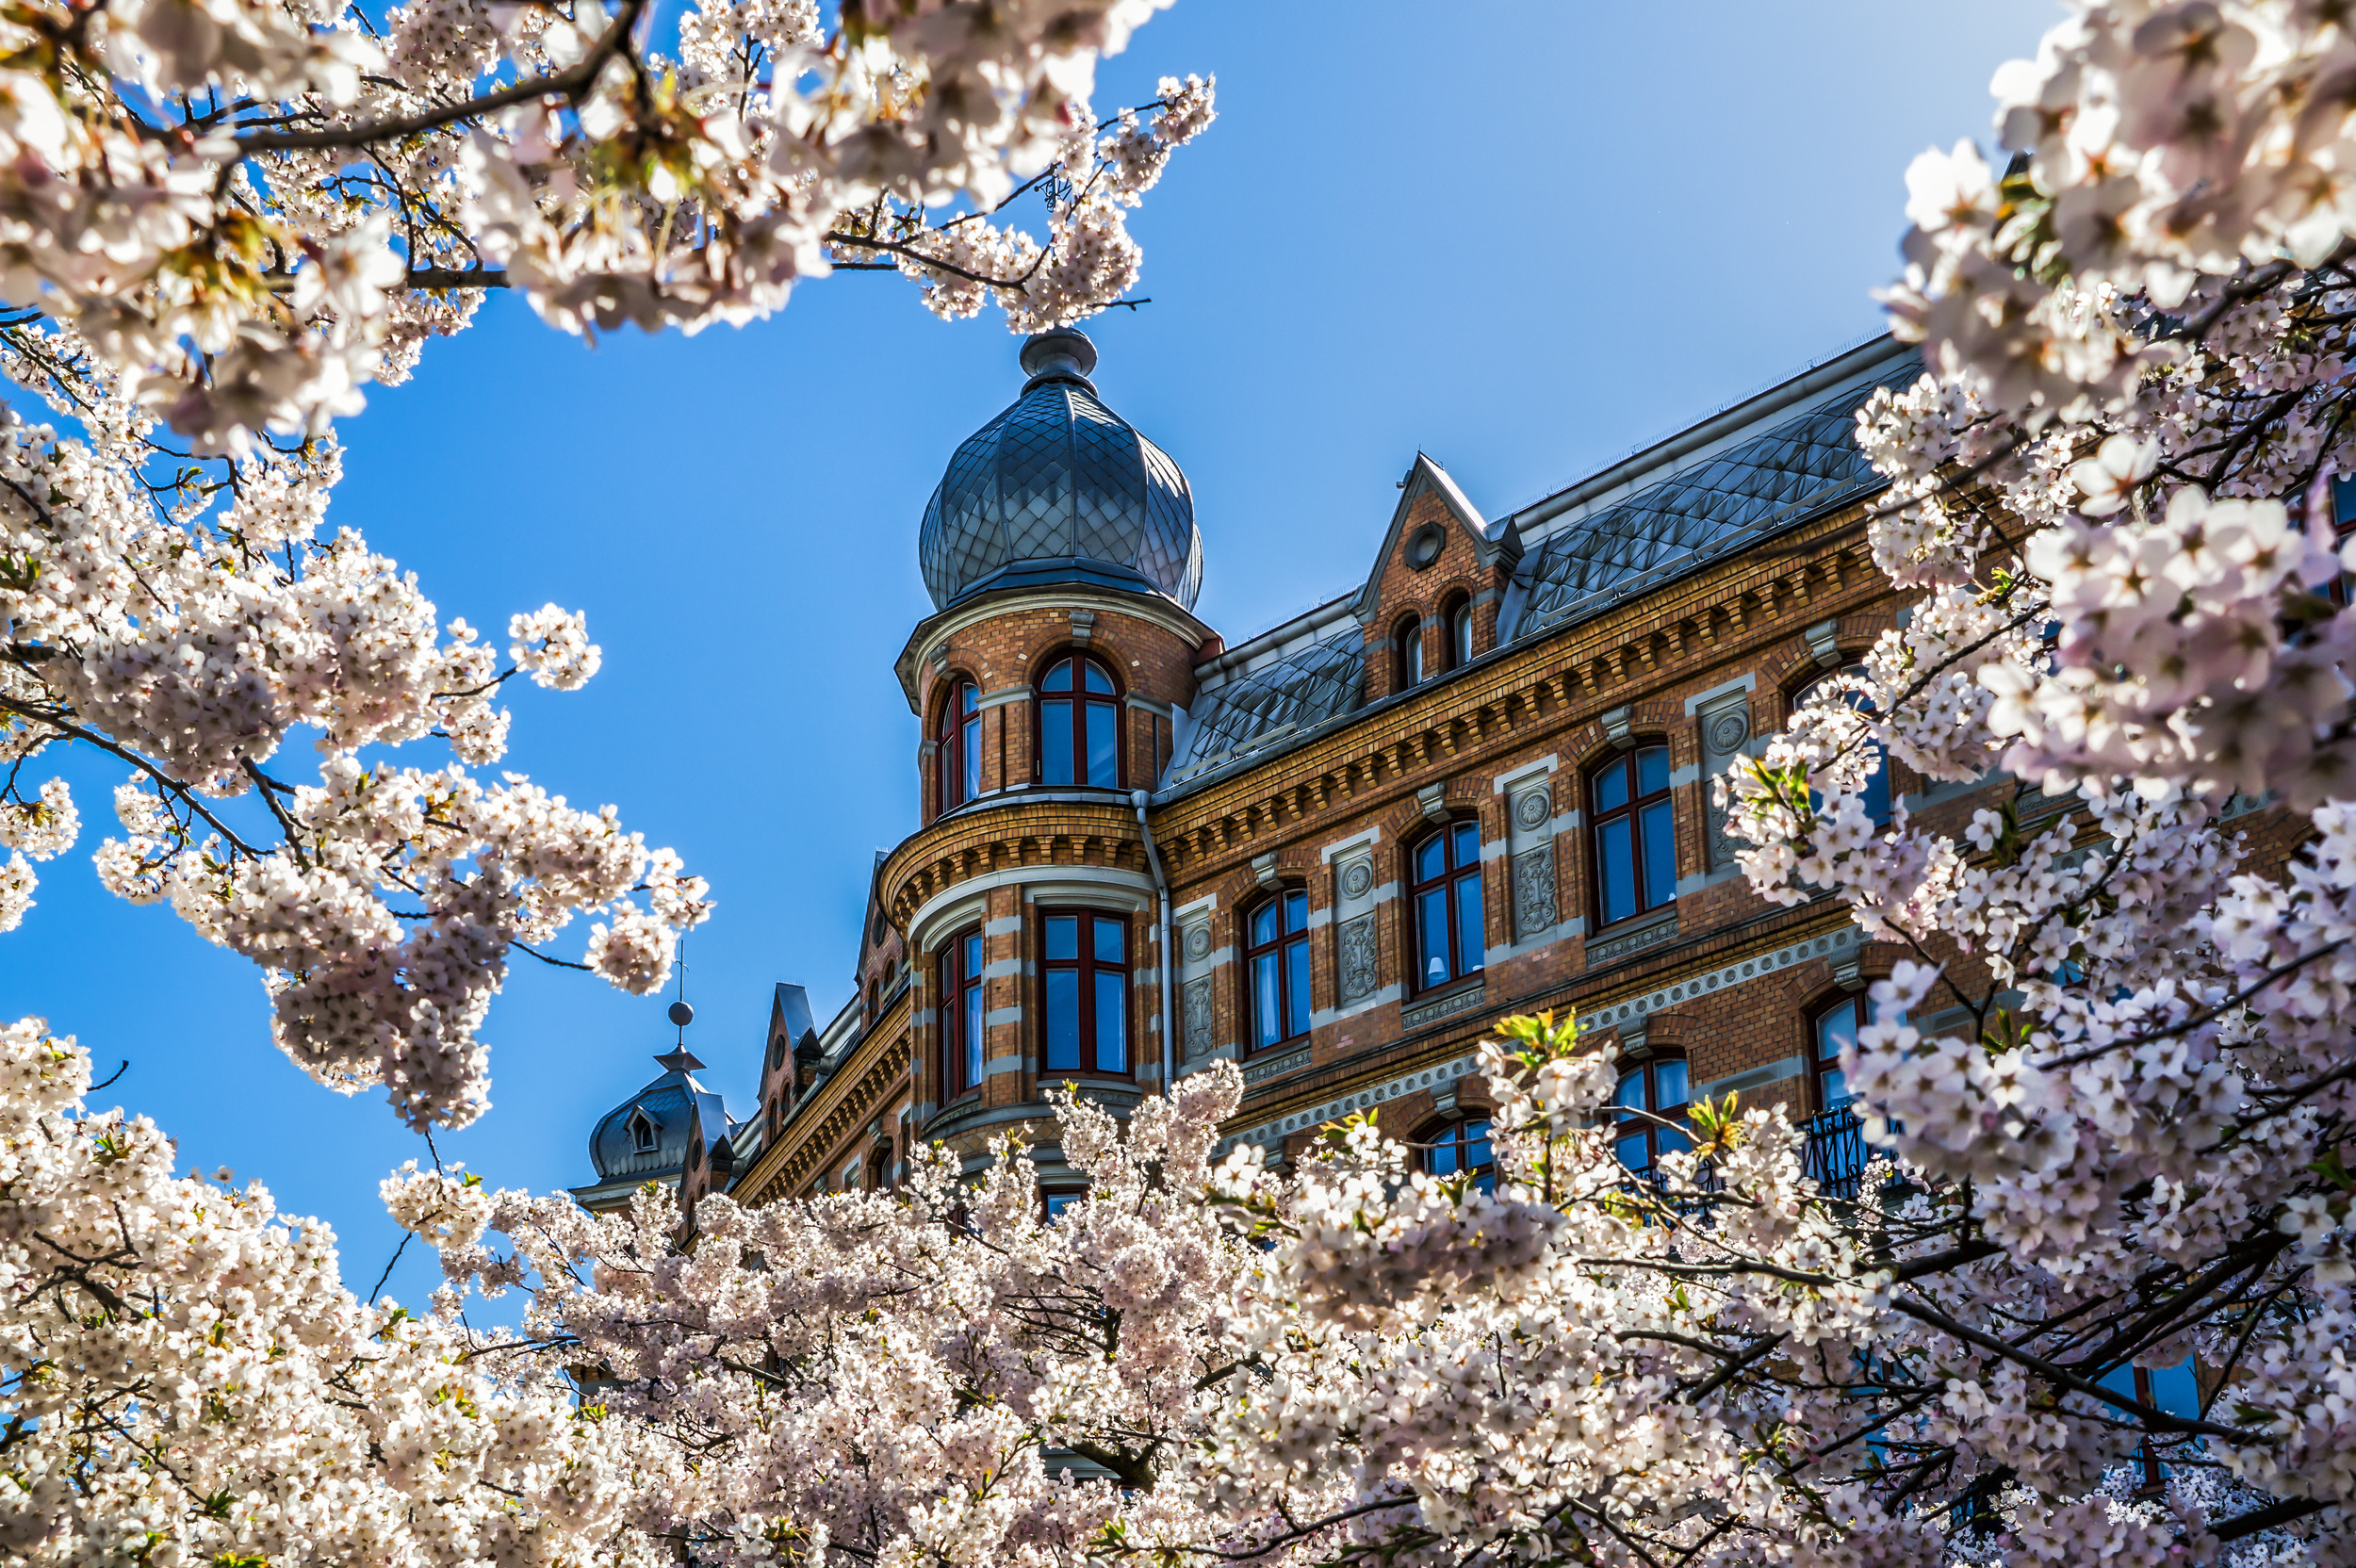 <p>If you want to catch cherry blossoms in Europe and still need to cross Scandinavia off your list, then don’t miss Gothenburg! The West Coast’s largest city is full of trees that bloom every year. As this is northern Europe though, the blossoms come a bit later, usually in May.</p><p><a href='https://www.msn.com/en-us/community/channel/vid-cj9pqbr0vn9in2b6ddcd8sfgpfq6x6utp44fssrv6mc2gtybw0us'>Follow us on MSN to see more of our exclusive lifestyle content.</a></p>